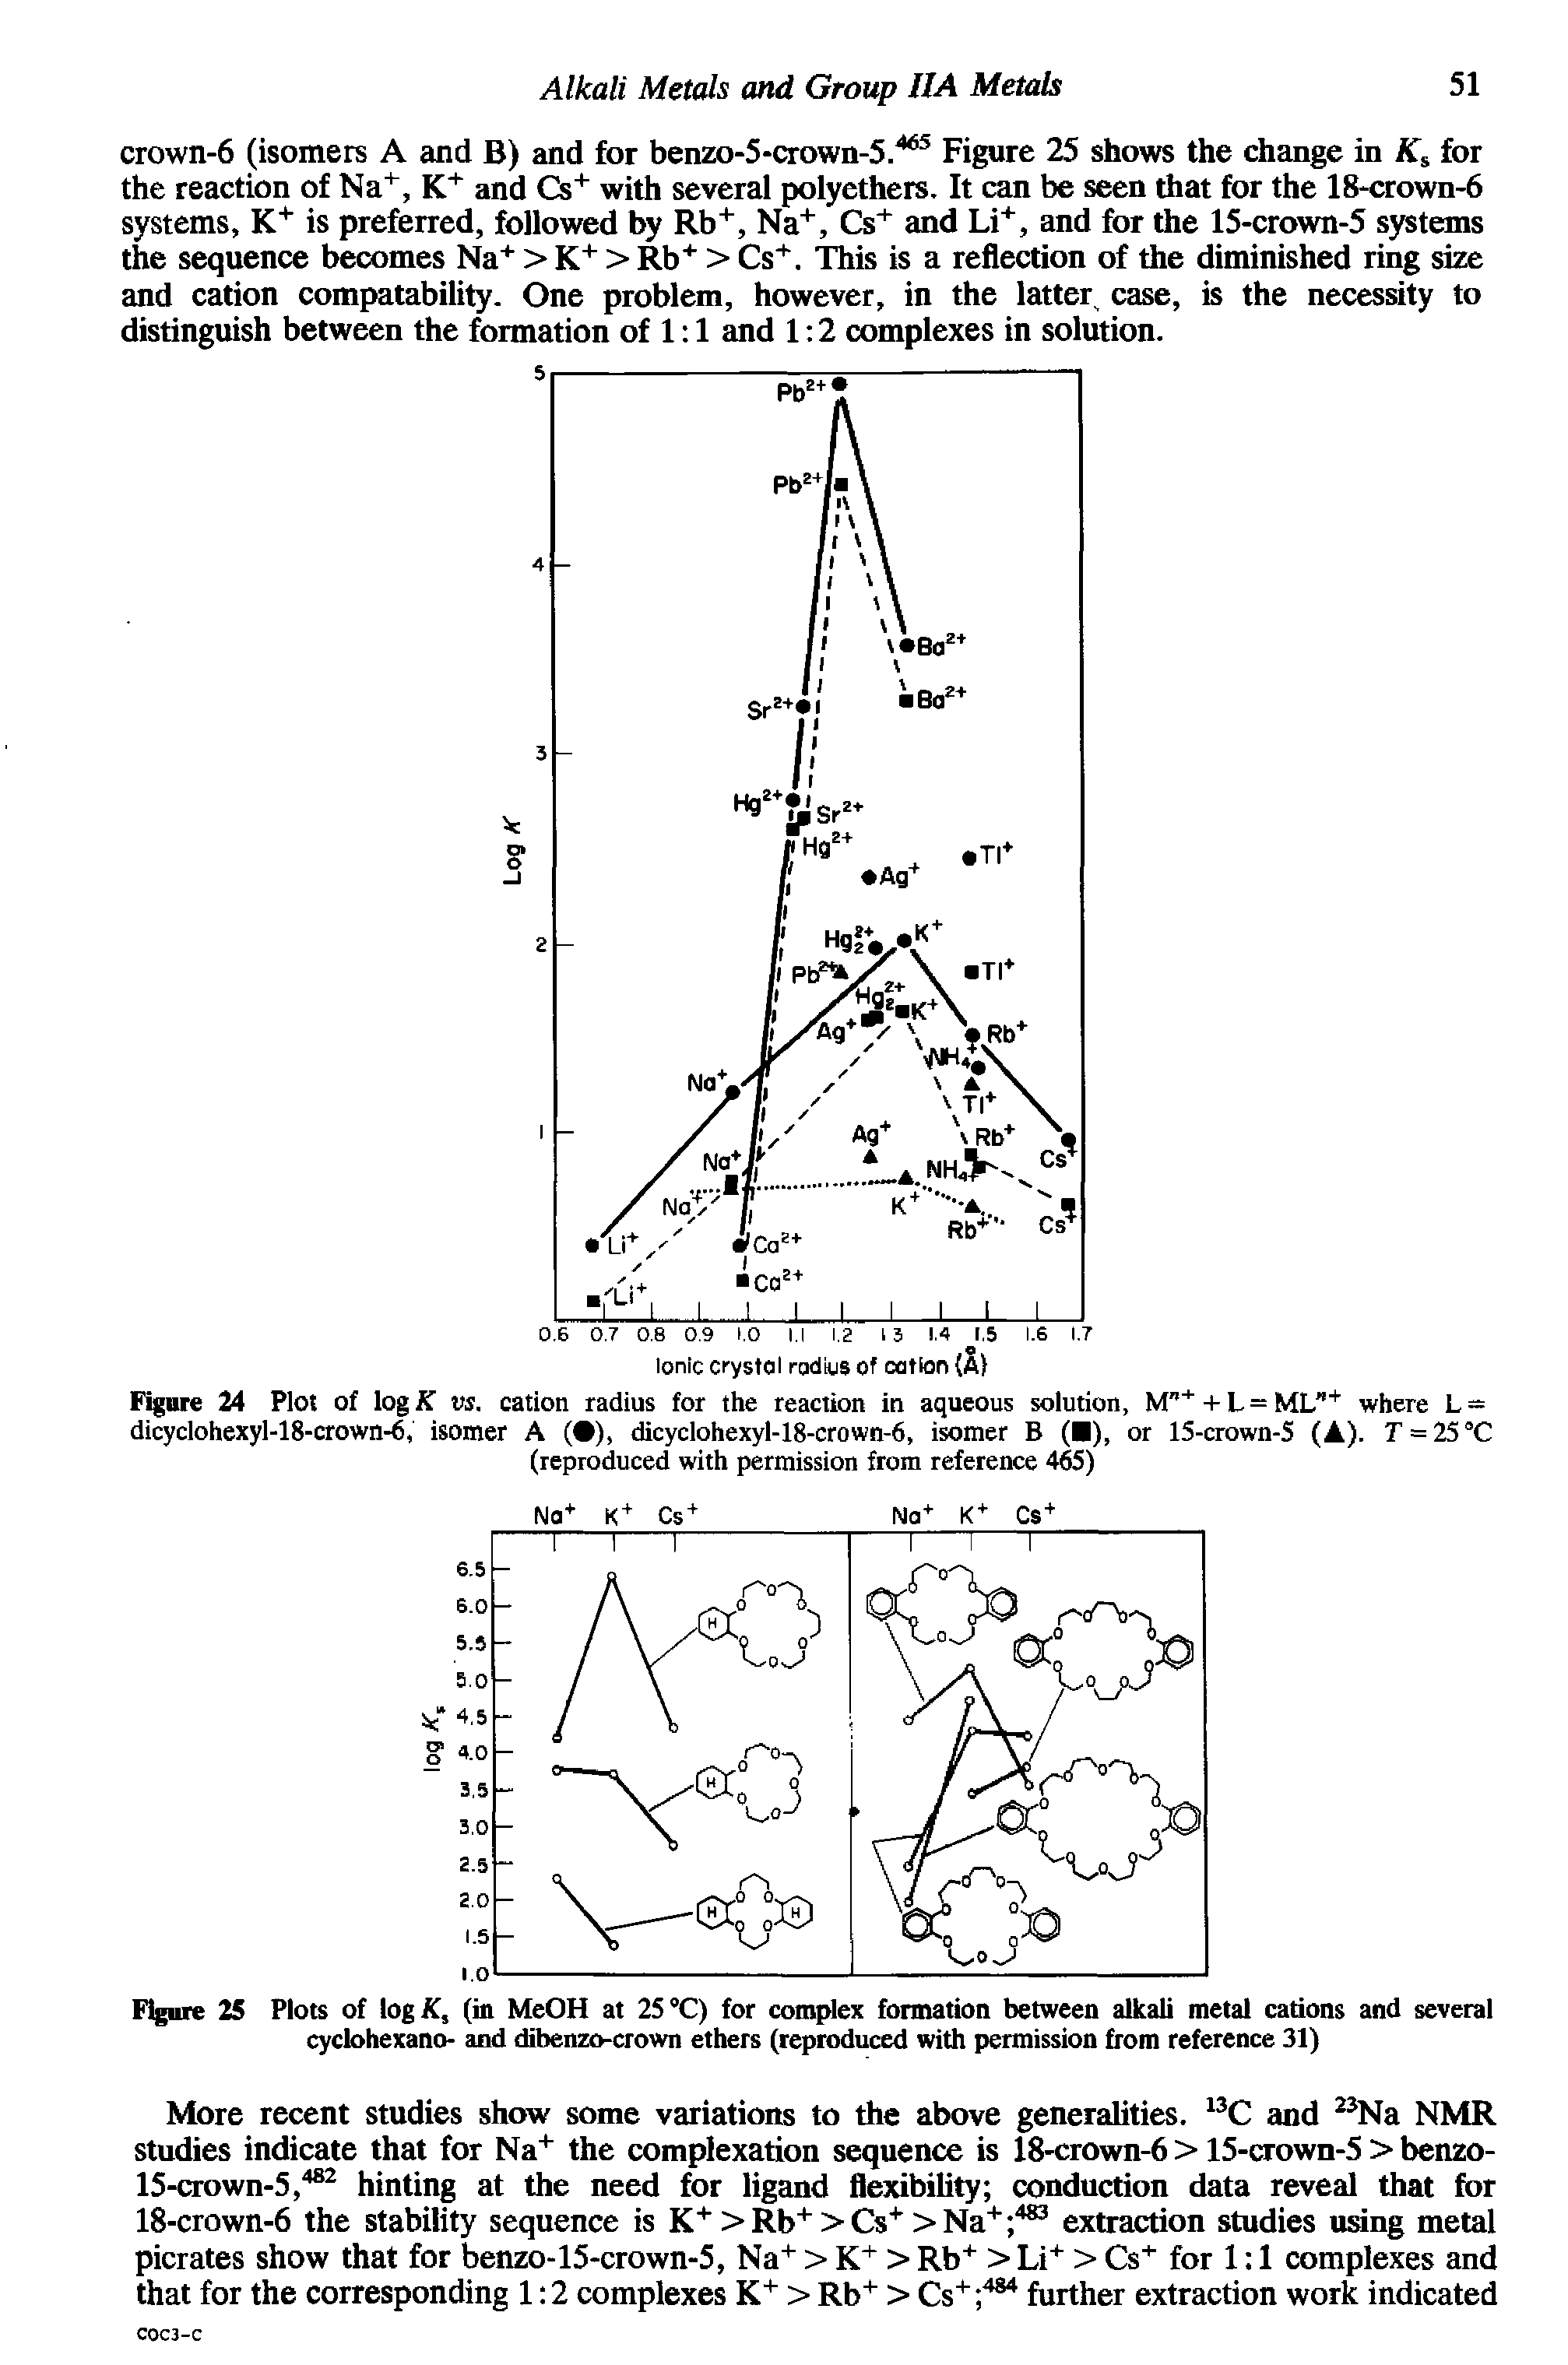 Figure 25 Plots of log K, (in MeOH at 25 °C) for complex formation between alkali metal cations and several cyclohexano- and dibenzo-crown ethers (reproduced with permission from reference 31)...